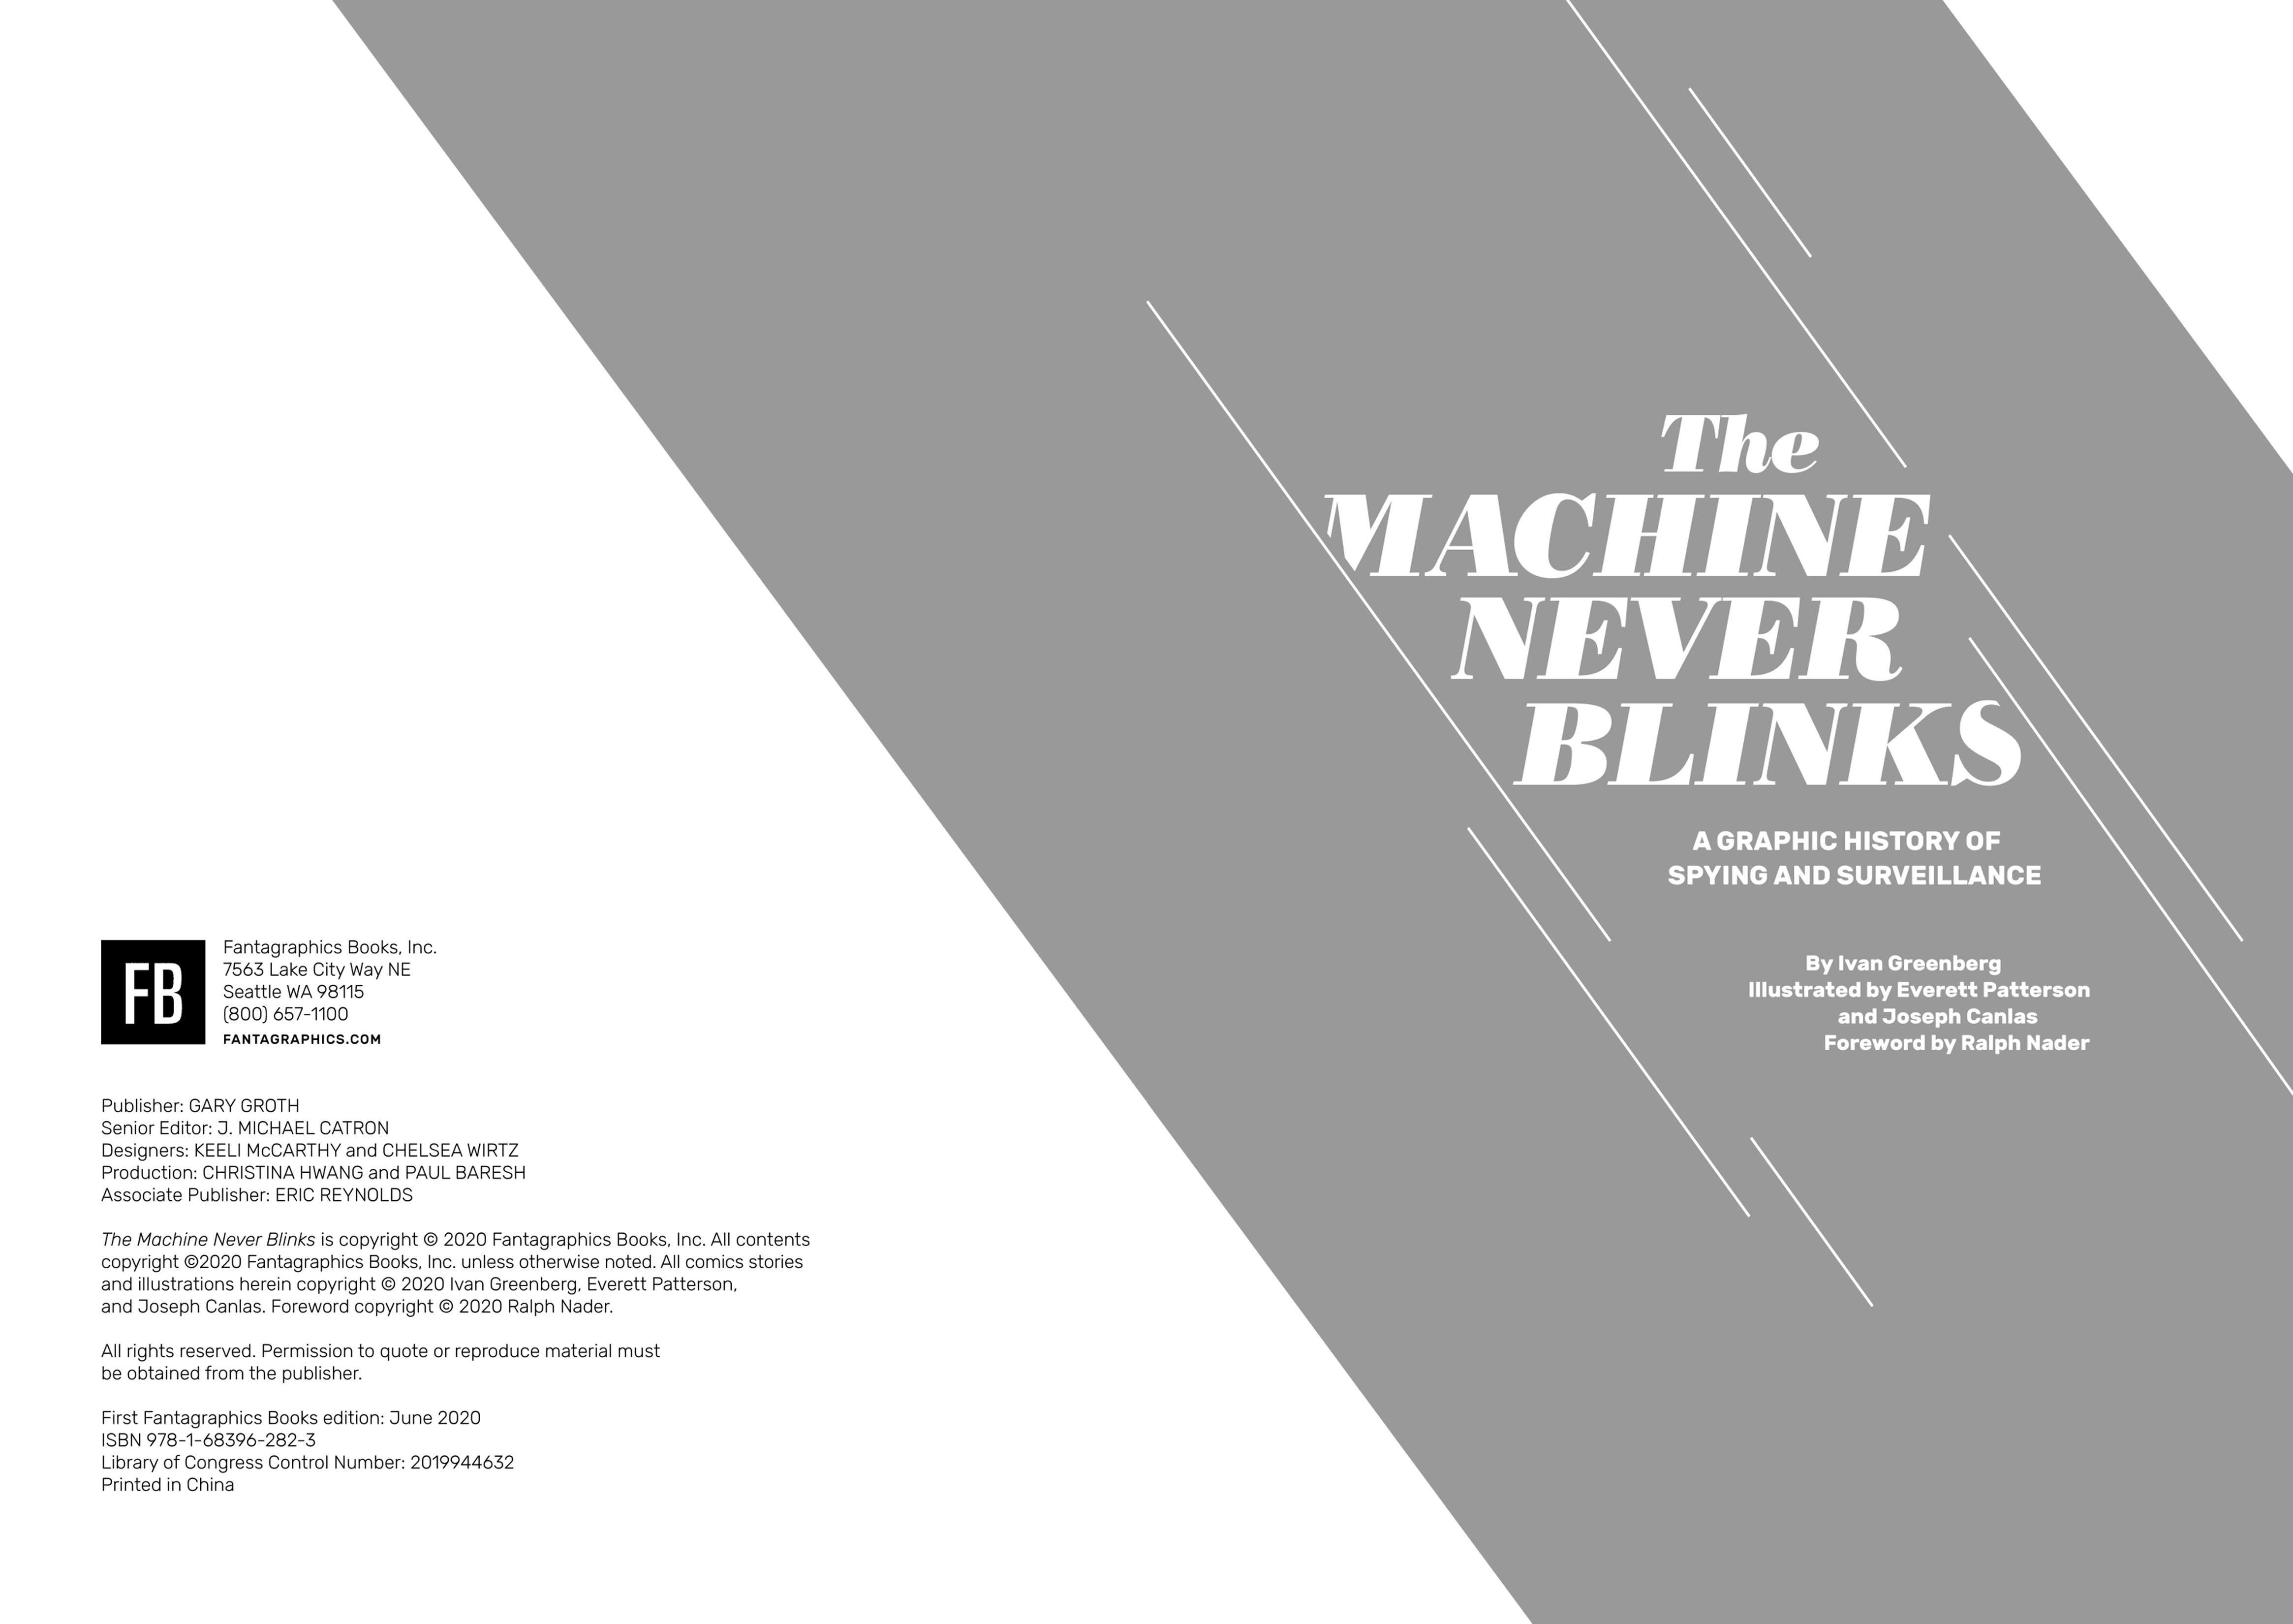 Read online The Machine Never Blinks: A Graphic History of Spying and Surveillance comic -  Issue # TPB - 3